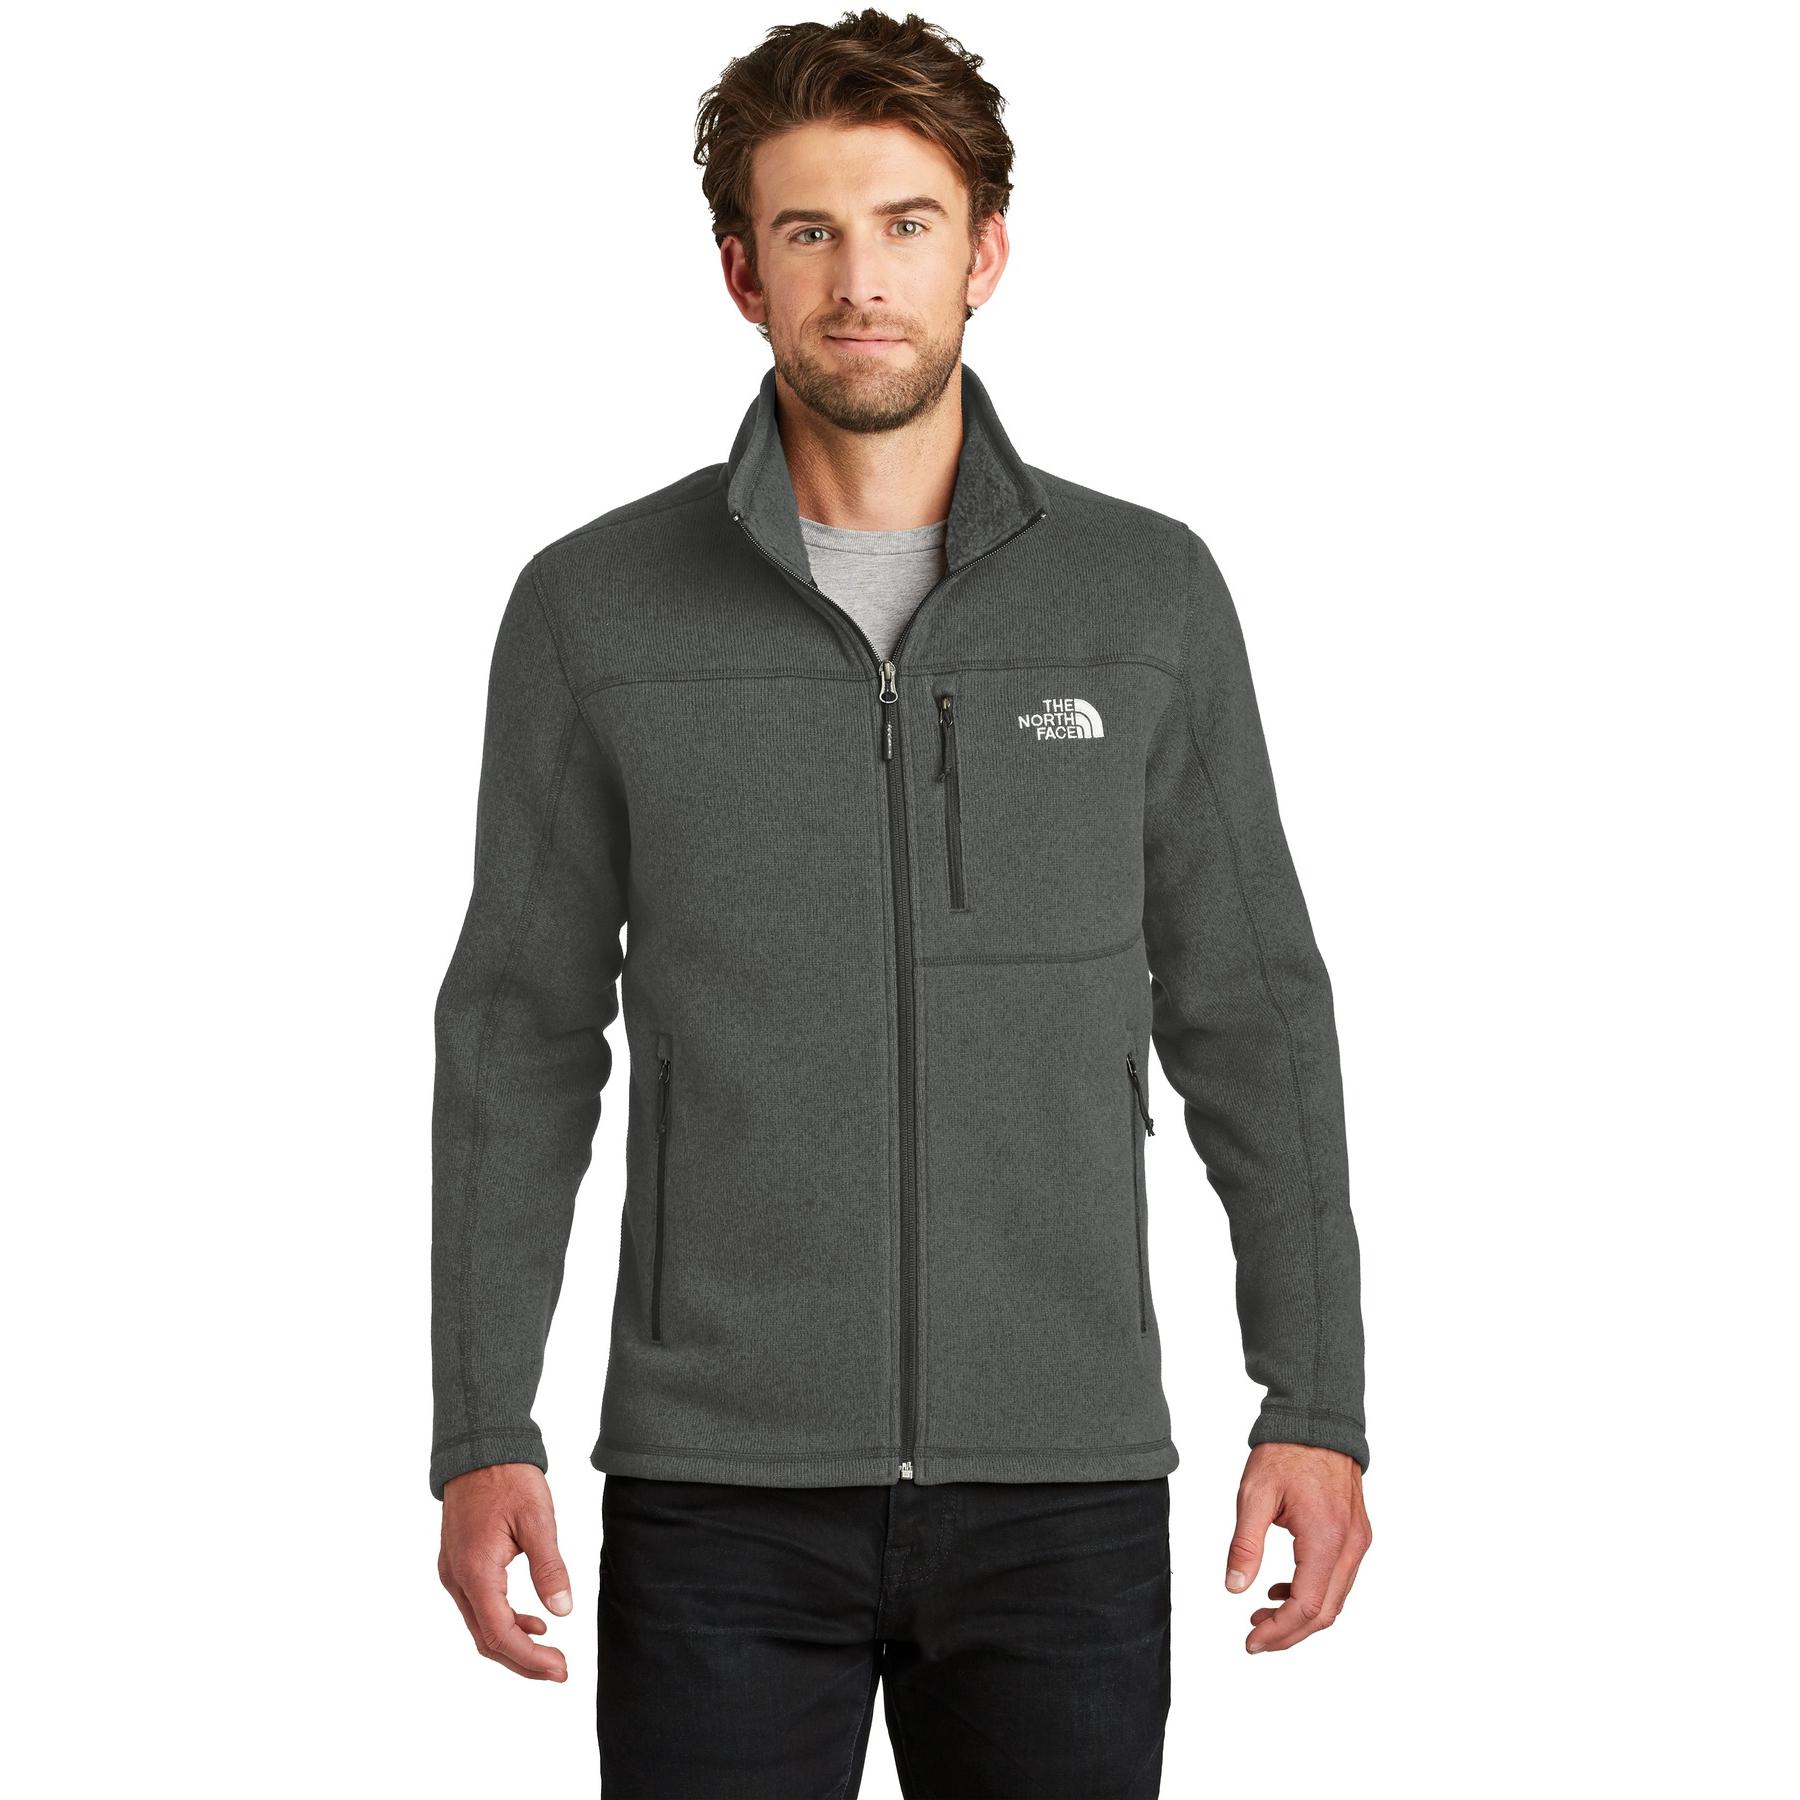 The North Face NF0A3LH7 Sweater Fleece Jacket - Black Heather ...